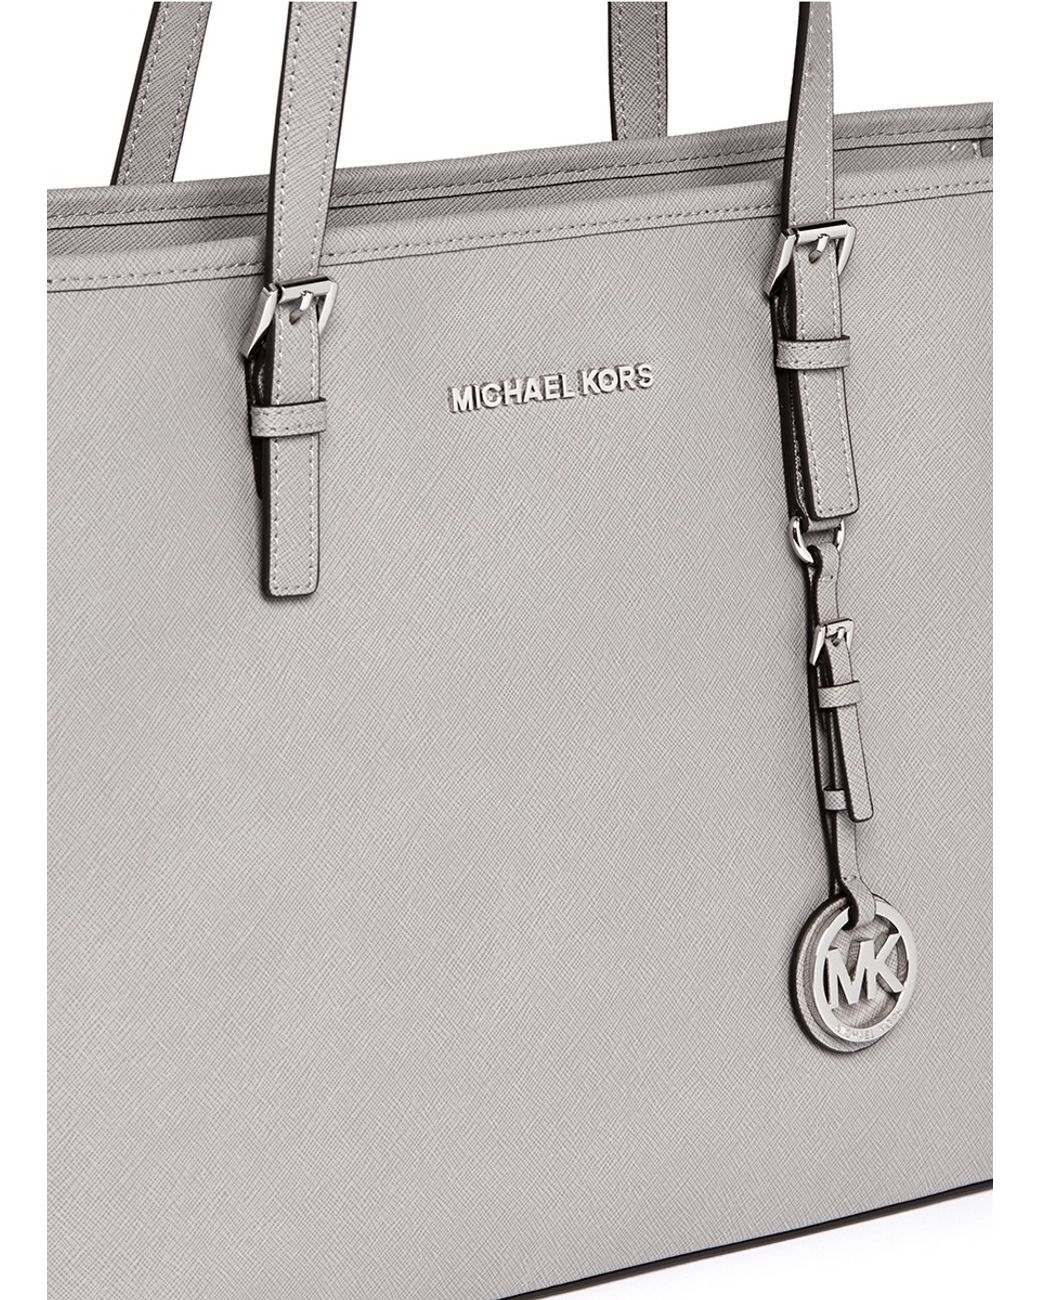 Michael Kors India Online - Shop Authentic Collections Up To 70% Off